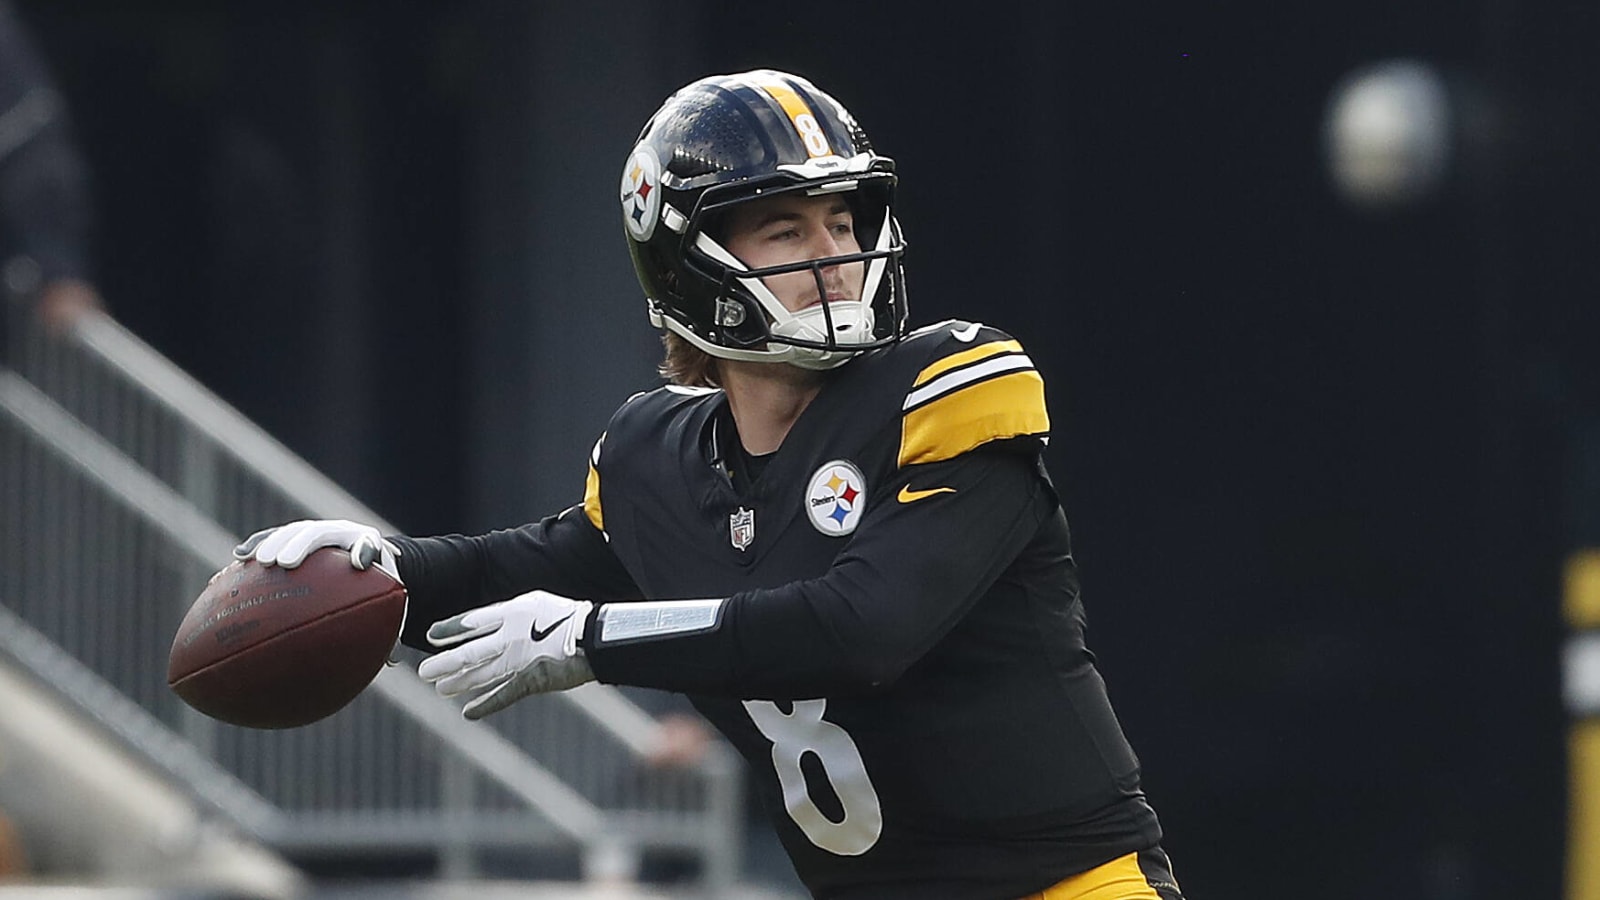 Report shares if Steelers planned to start Wilson over Pickett